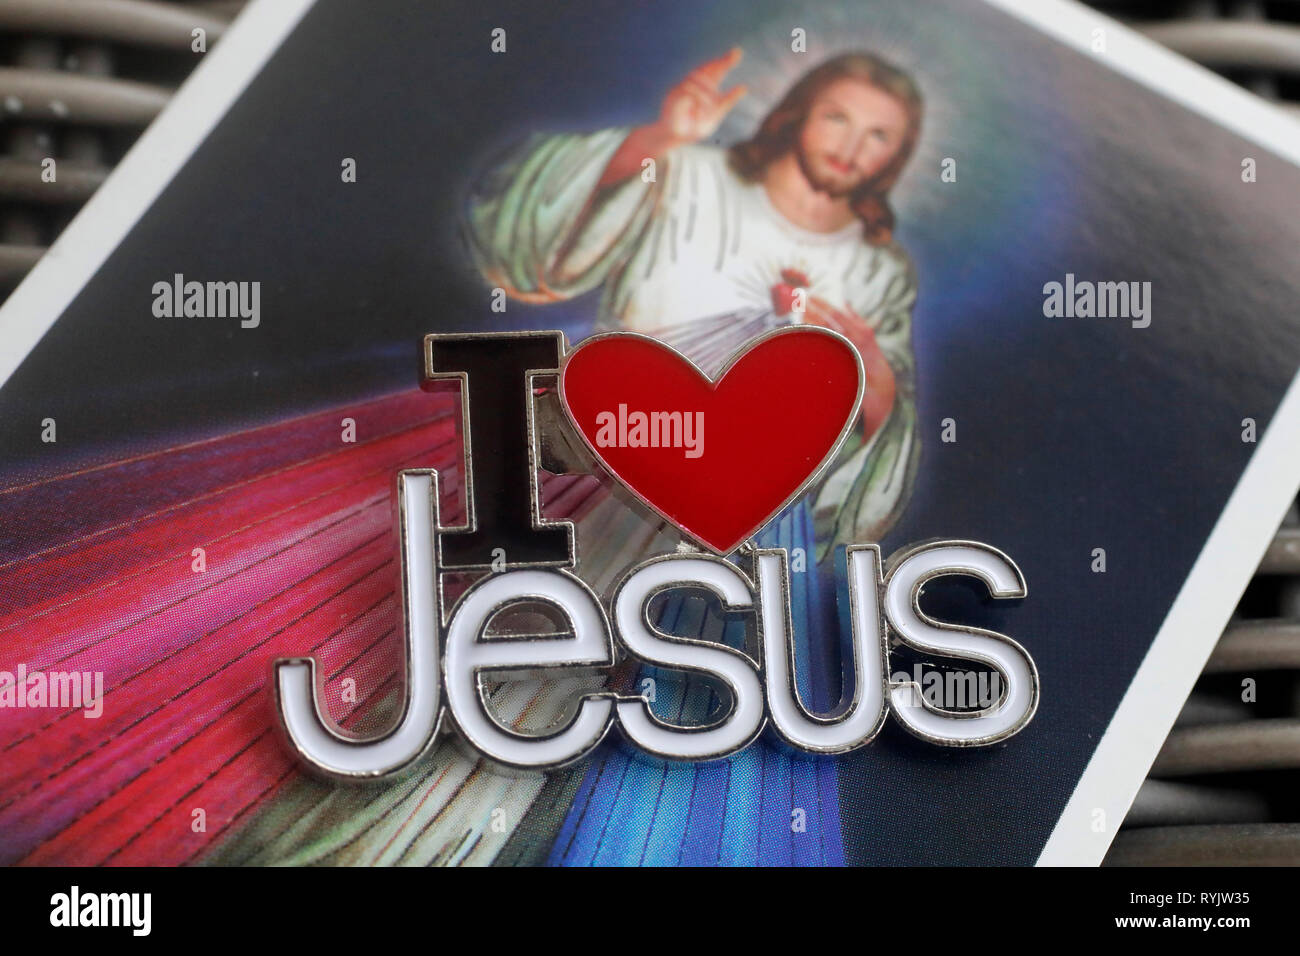 Image of Jesus the Divine Mercy, I trust in you and I Love jesus ...